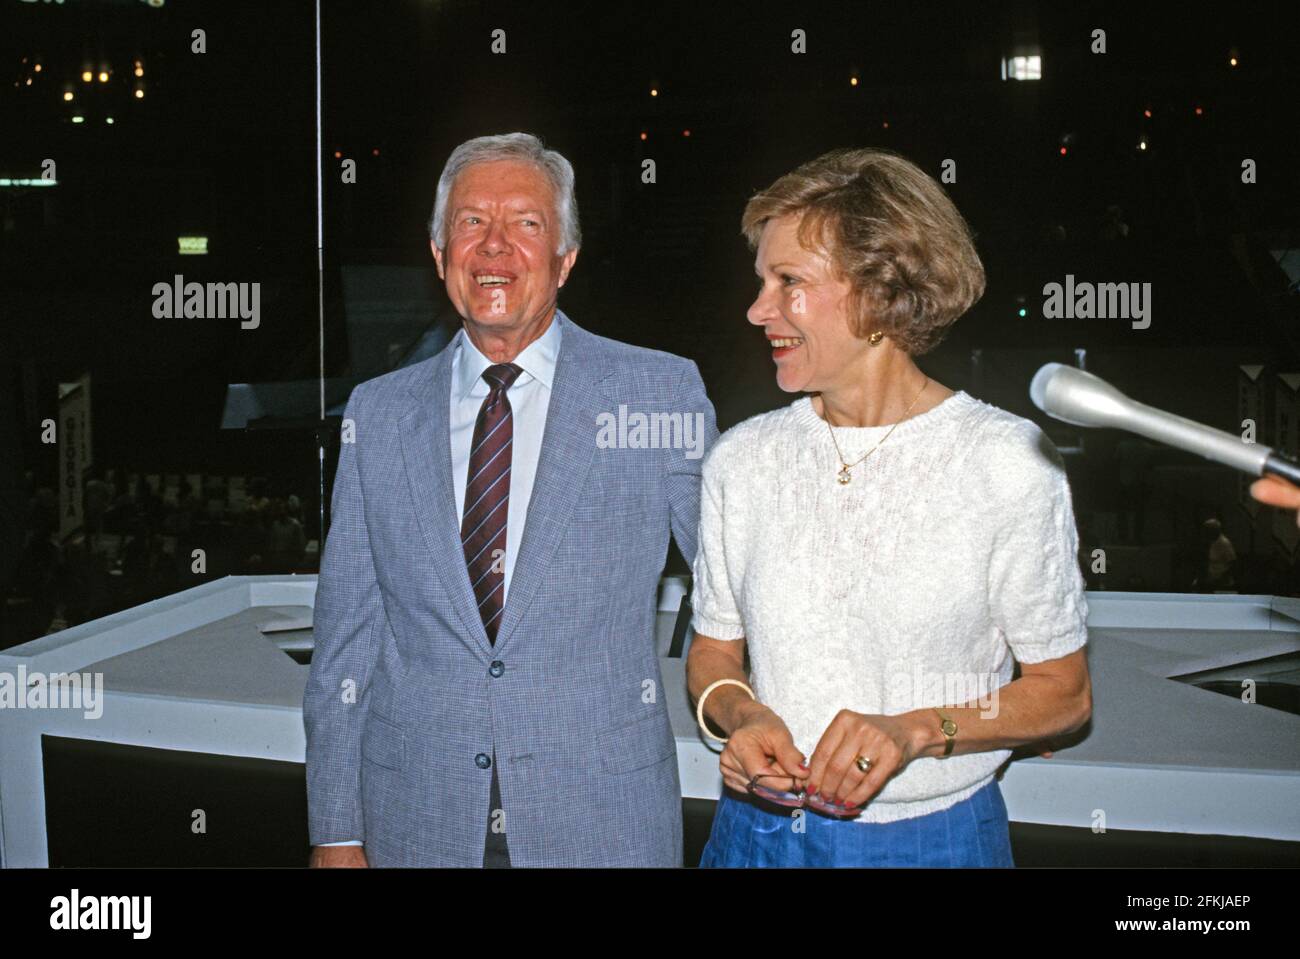 Former United States President Jimmy Carter, left, and former first lady Rosalynn Carter, right, visit the Omni Coliseum in Atlanta, Georgia, the site of the 1988 Democratic National Convention, prior to the President delivering remarks on July 18, 1988.Credit: Arnie Sachs/CNP/Sipa USA Credit: Sipa USA/Alamy Live News Stock Photo